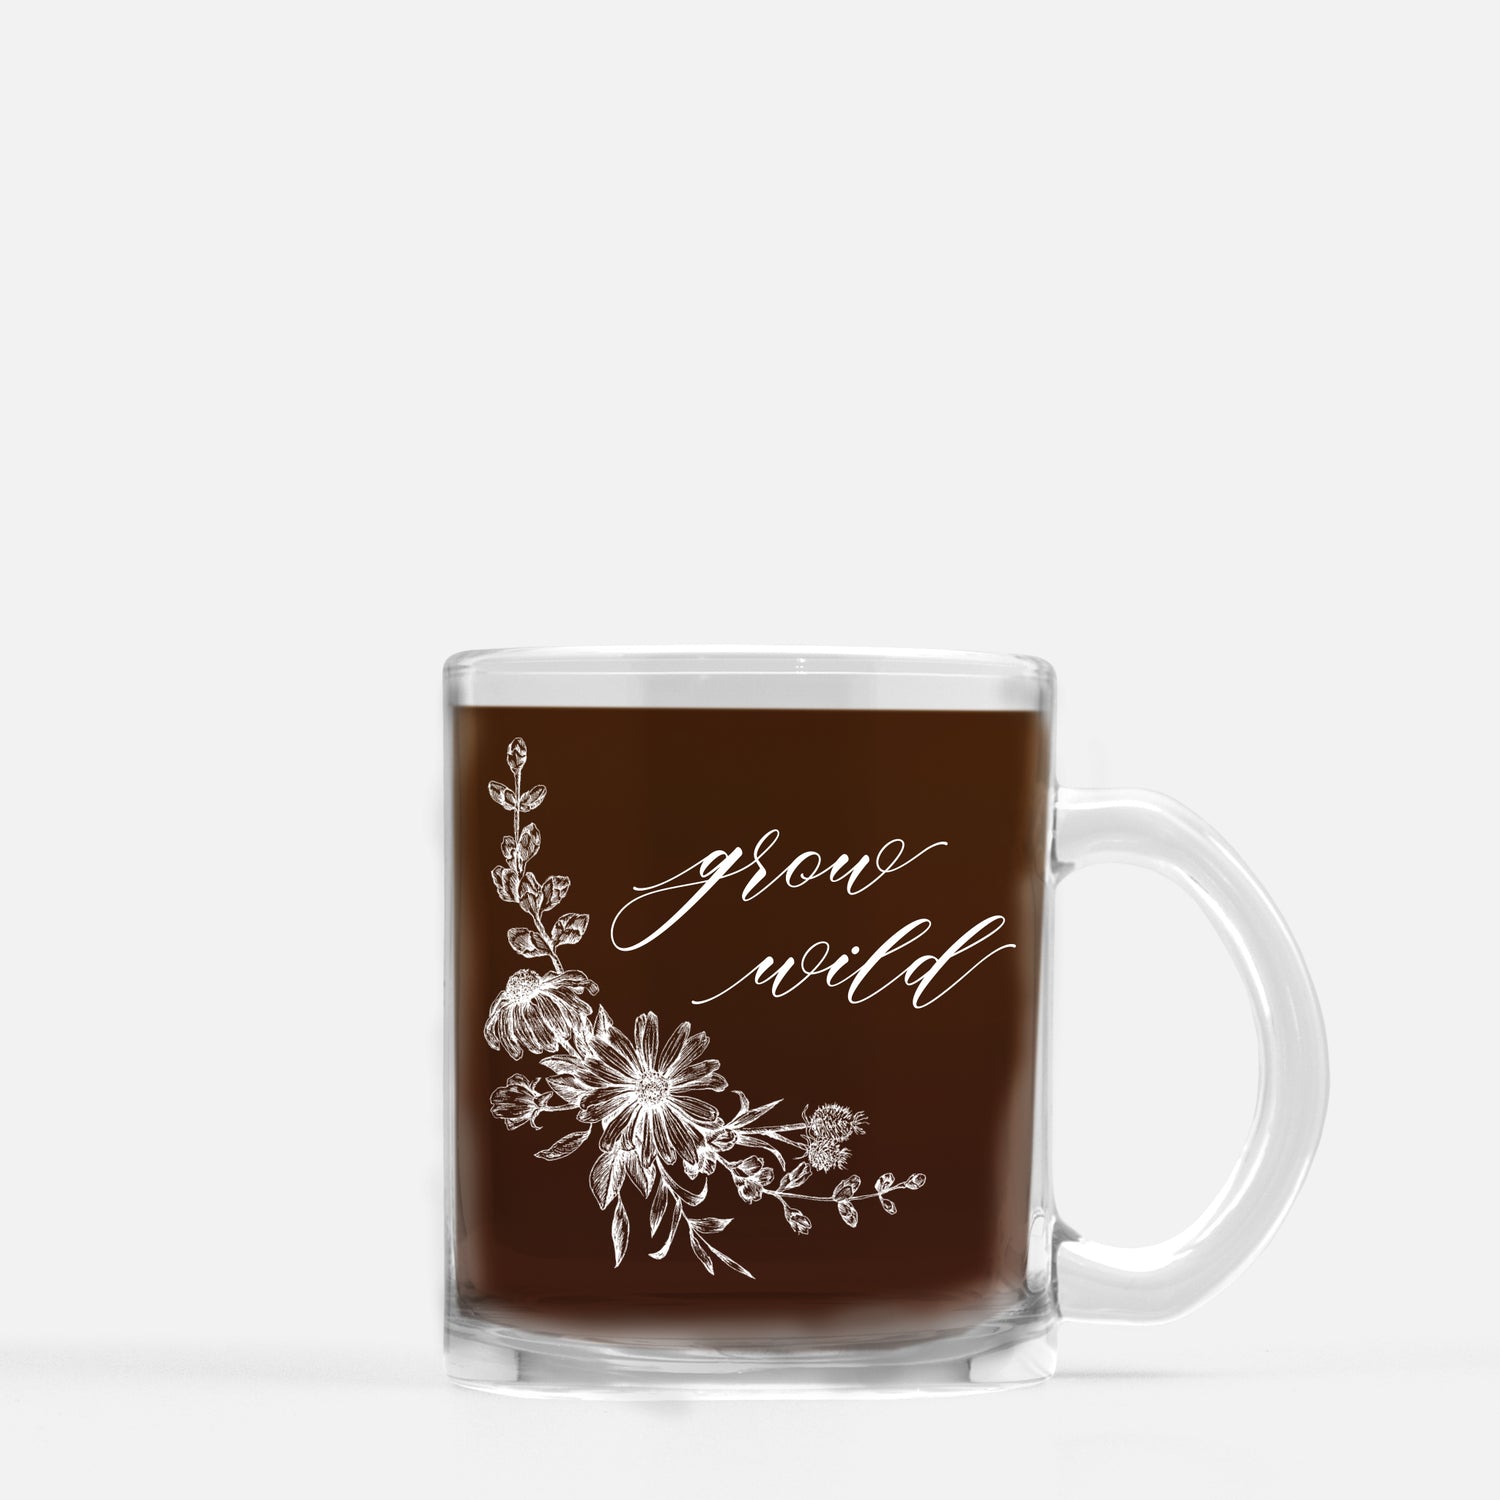 White ink on clear glass mug with flowers and that says "grow wild" by Rust Belt Love